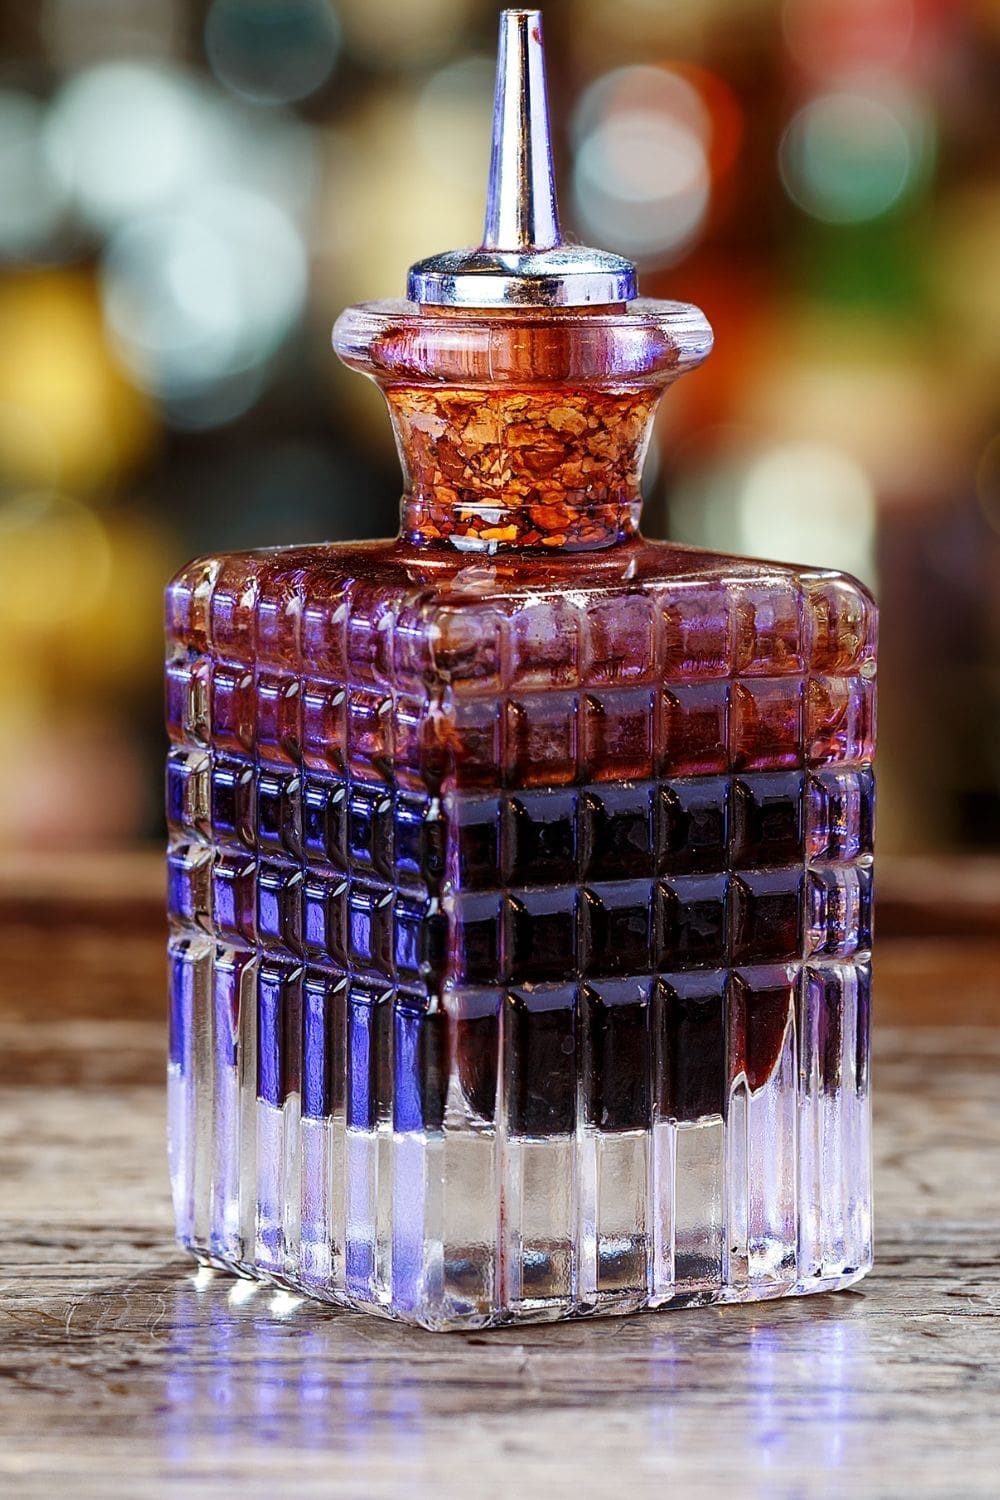 A small, square glass bottle with a cork stopper, filled with angostura bitters, sits on a light wooden table.